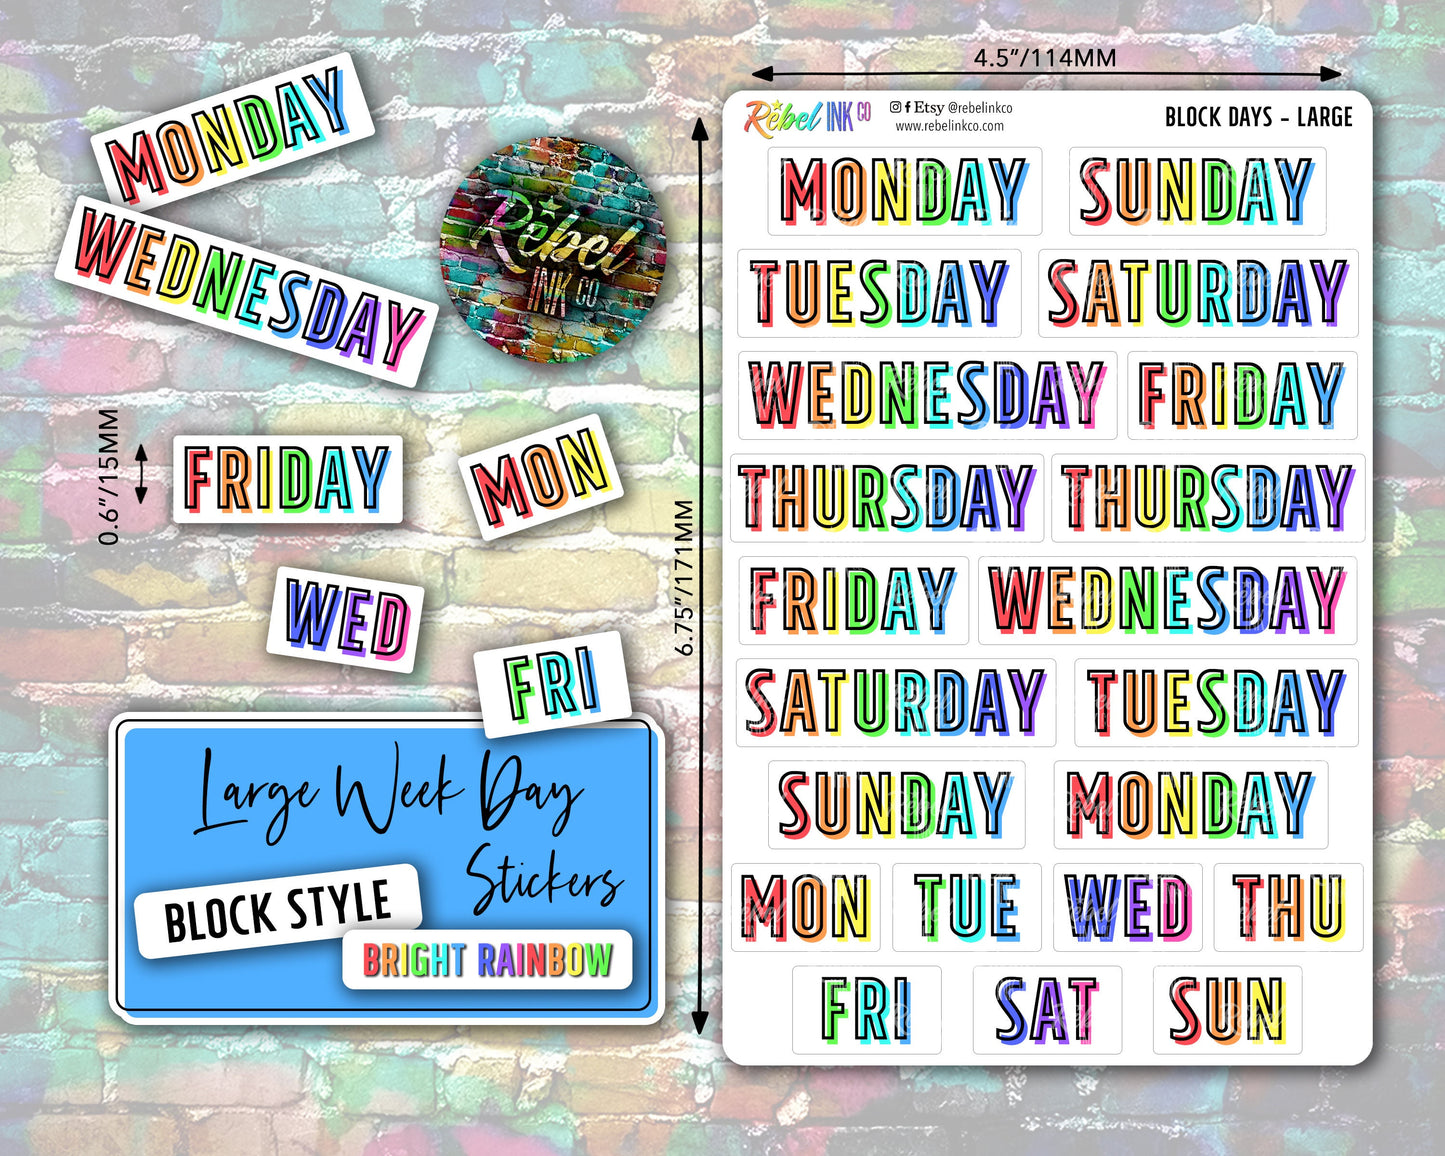 Week Day Stickers - Large - Bright Rainbow - Block Style